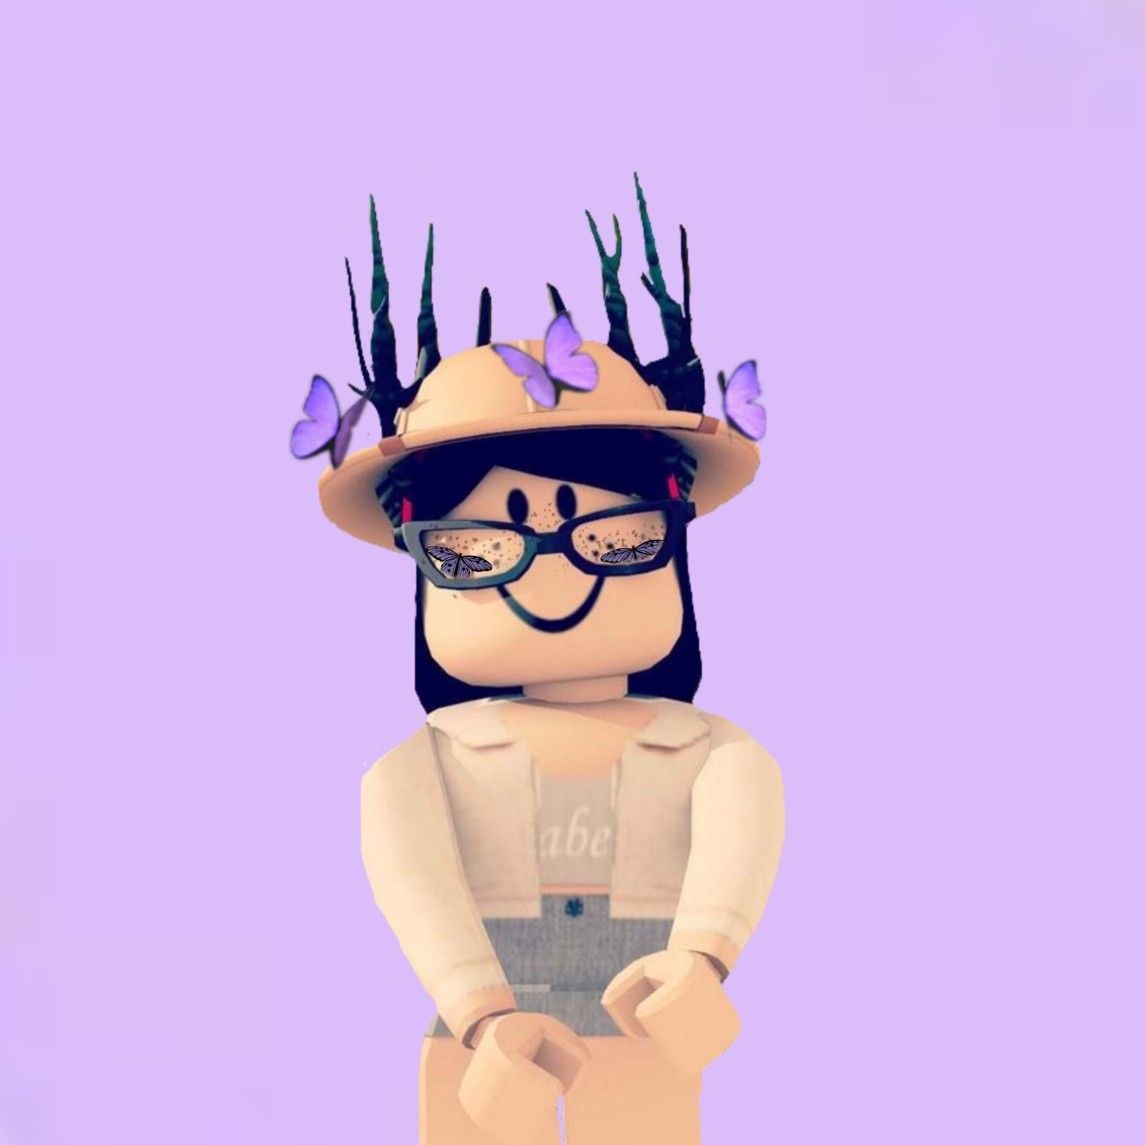 Aesthetic roblox wallpaper by Milinimamamayte - Download on ZEDGE™